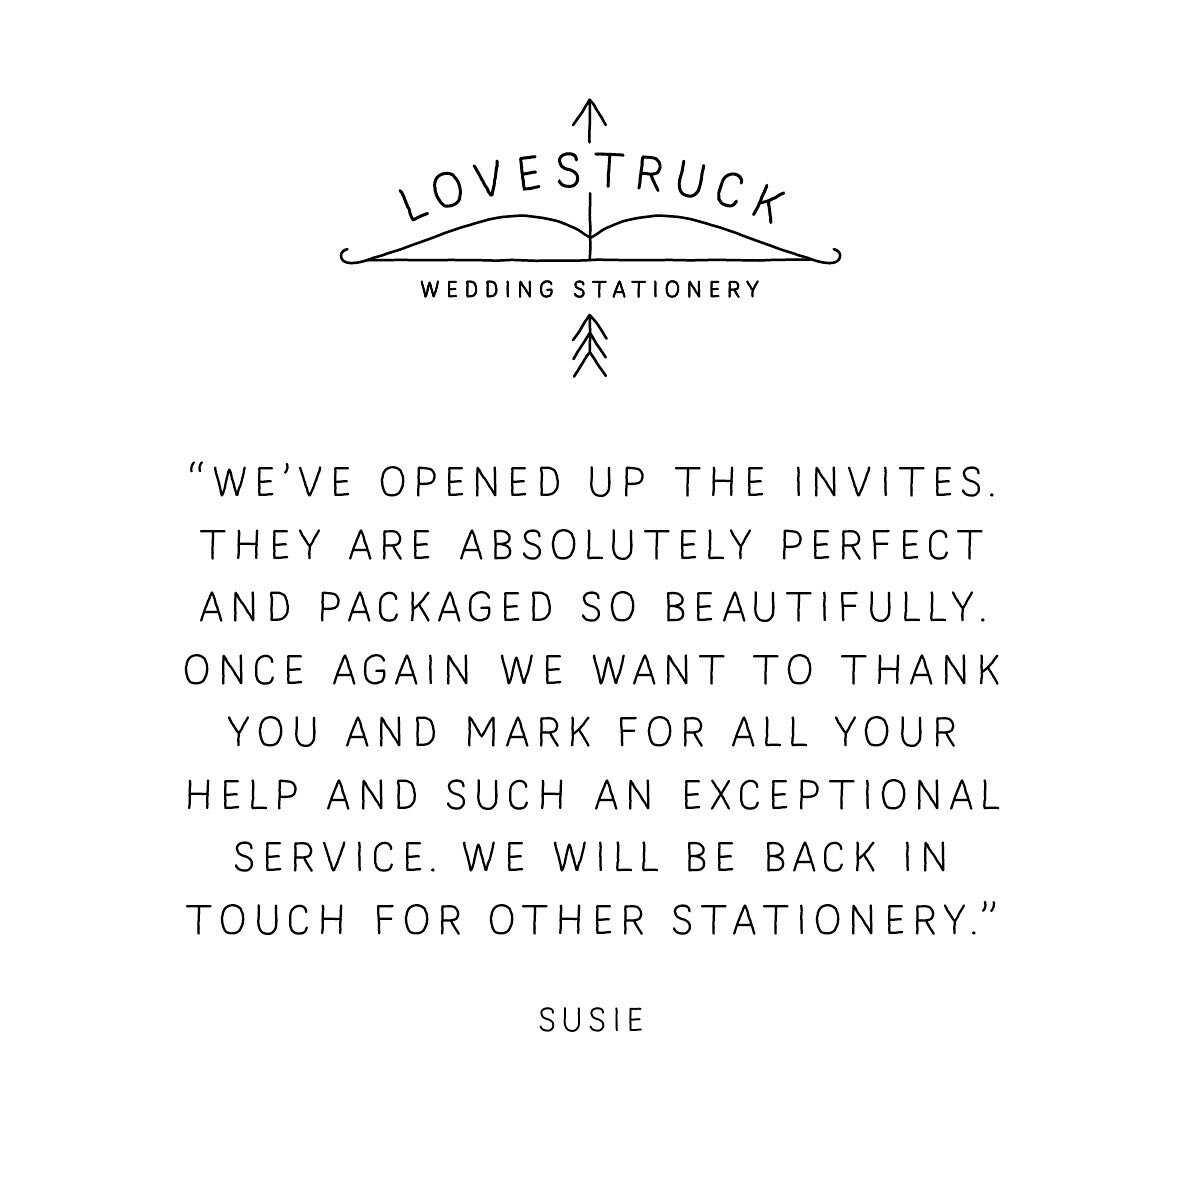 Receiving emails like this is what running a small business is all about 🤍
-
#weddingstationery
#wedding
#stationery
#happycustomer
#happydesigner
#lovemyjob 
#design
#graphicdesign
#print
#printanddesign
#weddinginspo
#invitations
#wedddinginvitati